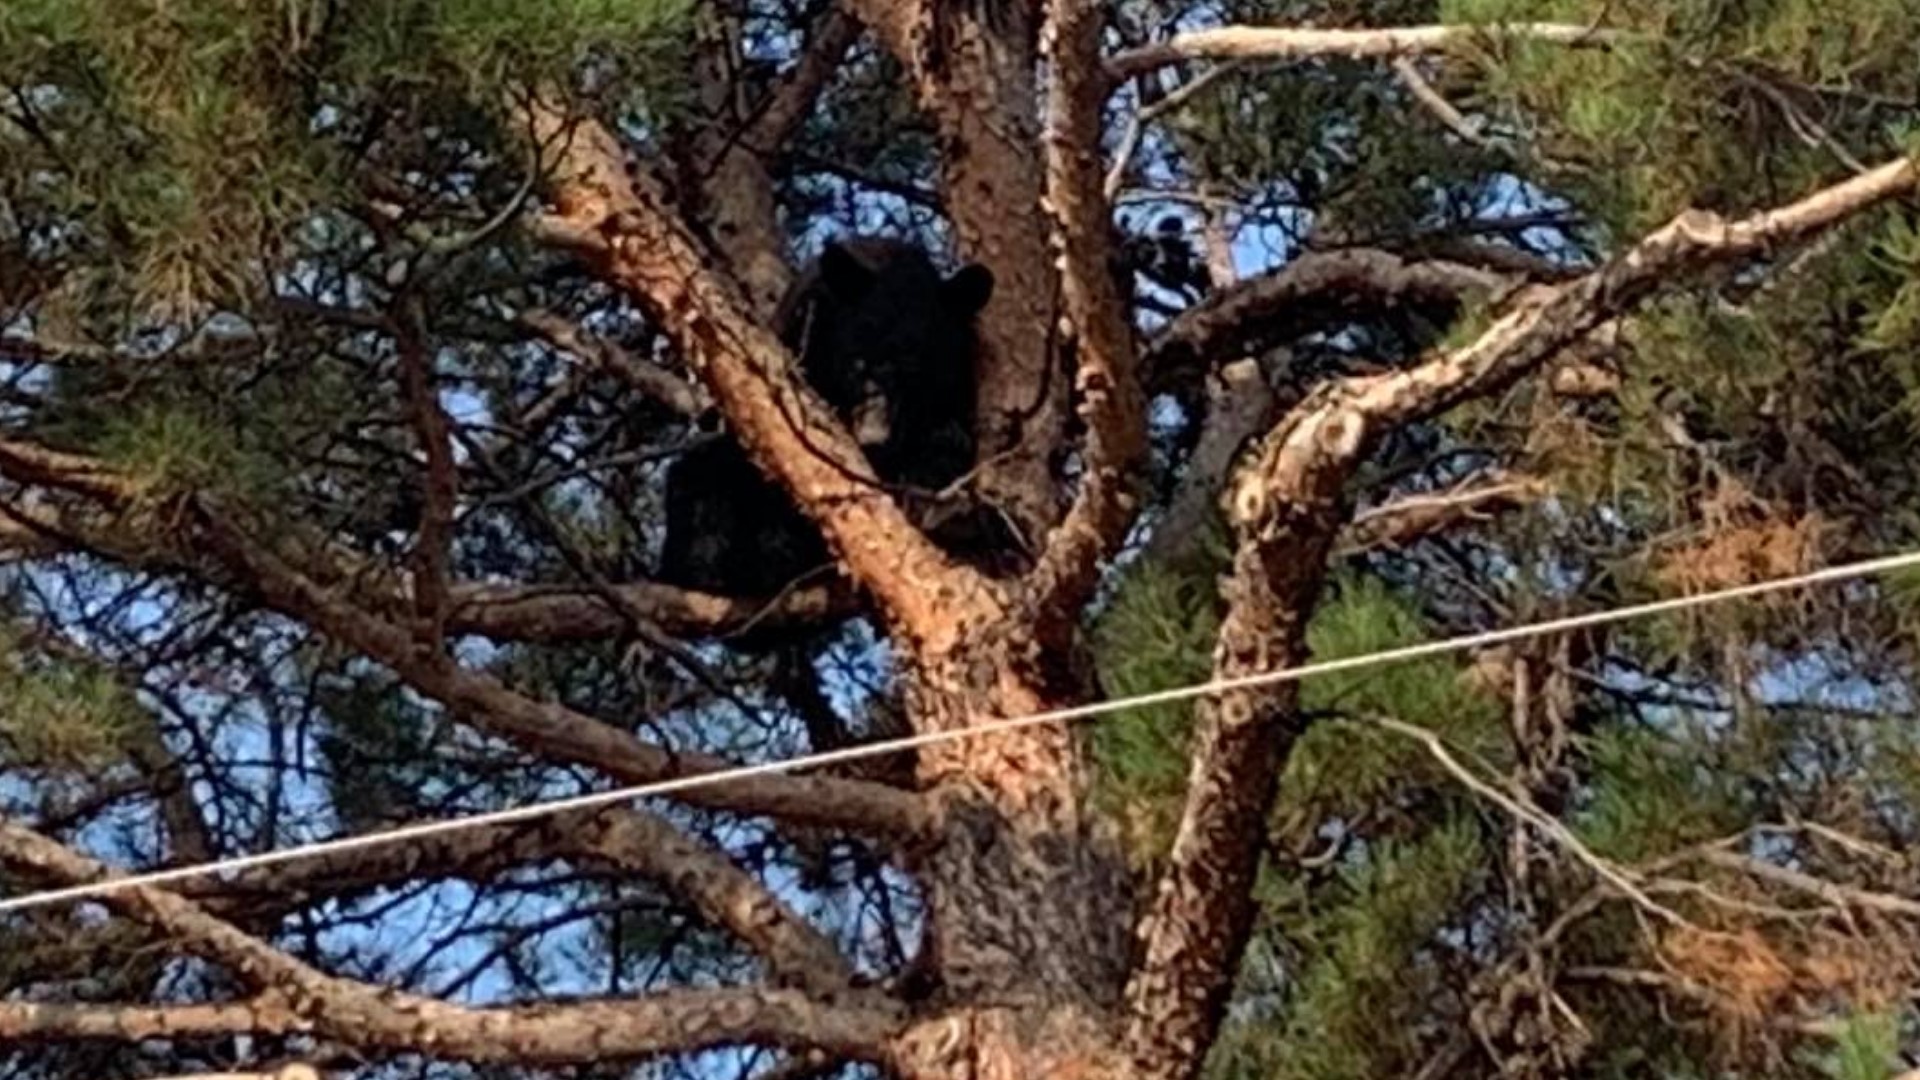 Alpine PD and Texas Parks and Wildlife say the bear does not pose an immediate threat but are working to relocate it.